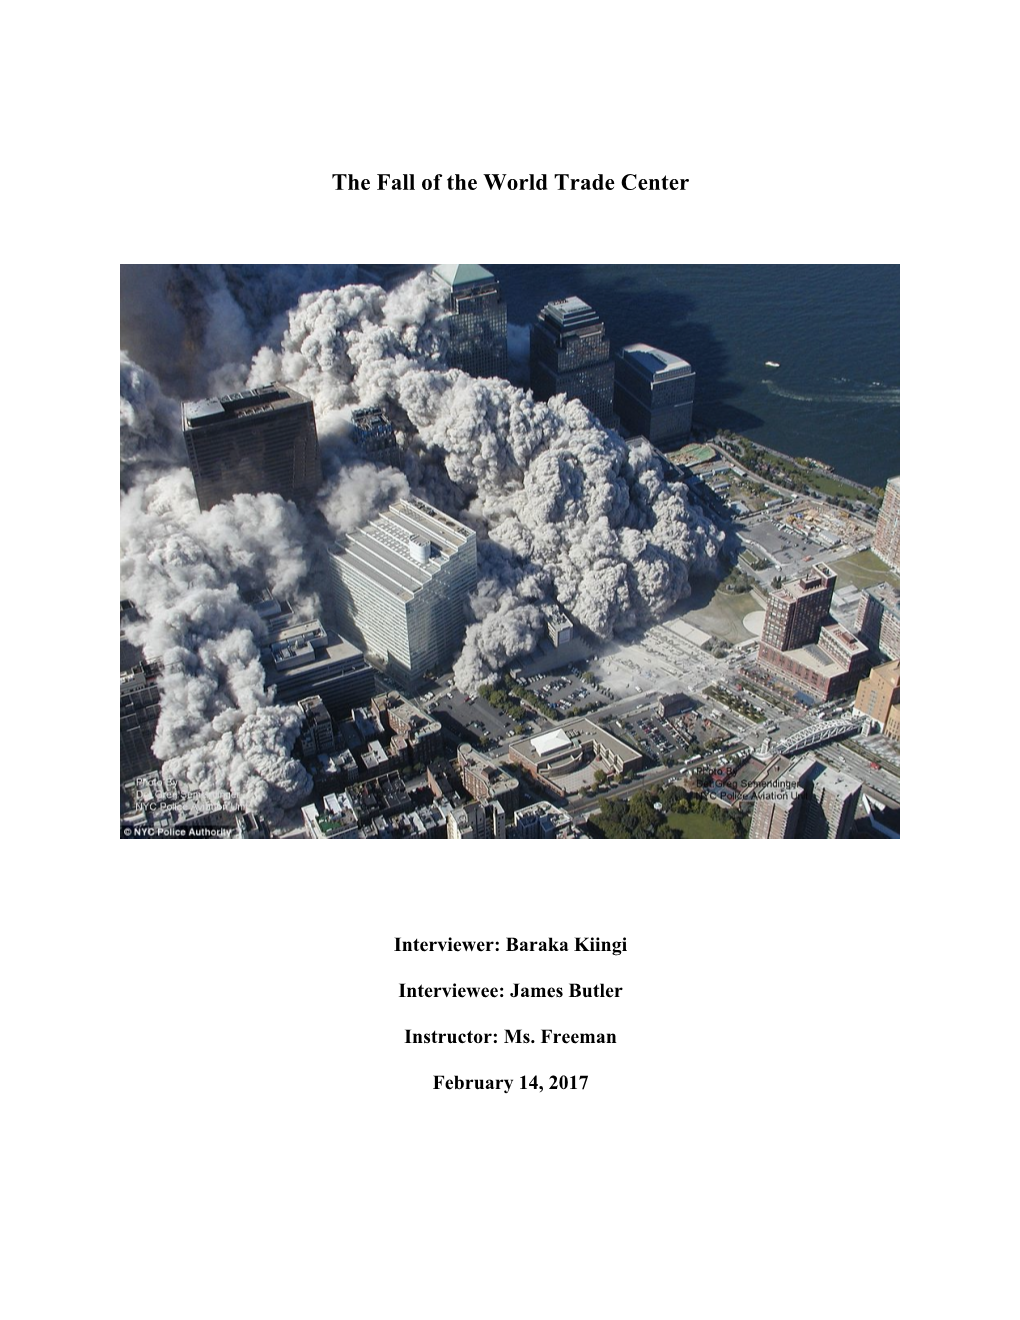 The Fall of the World Trade Center